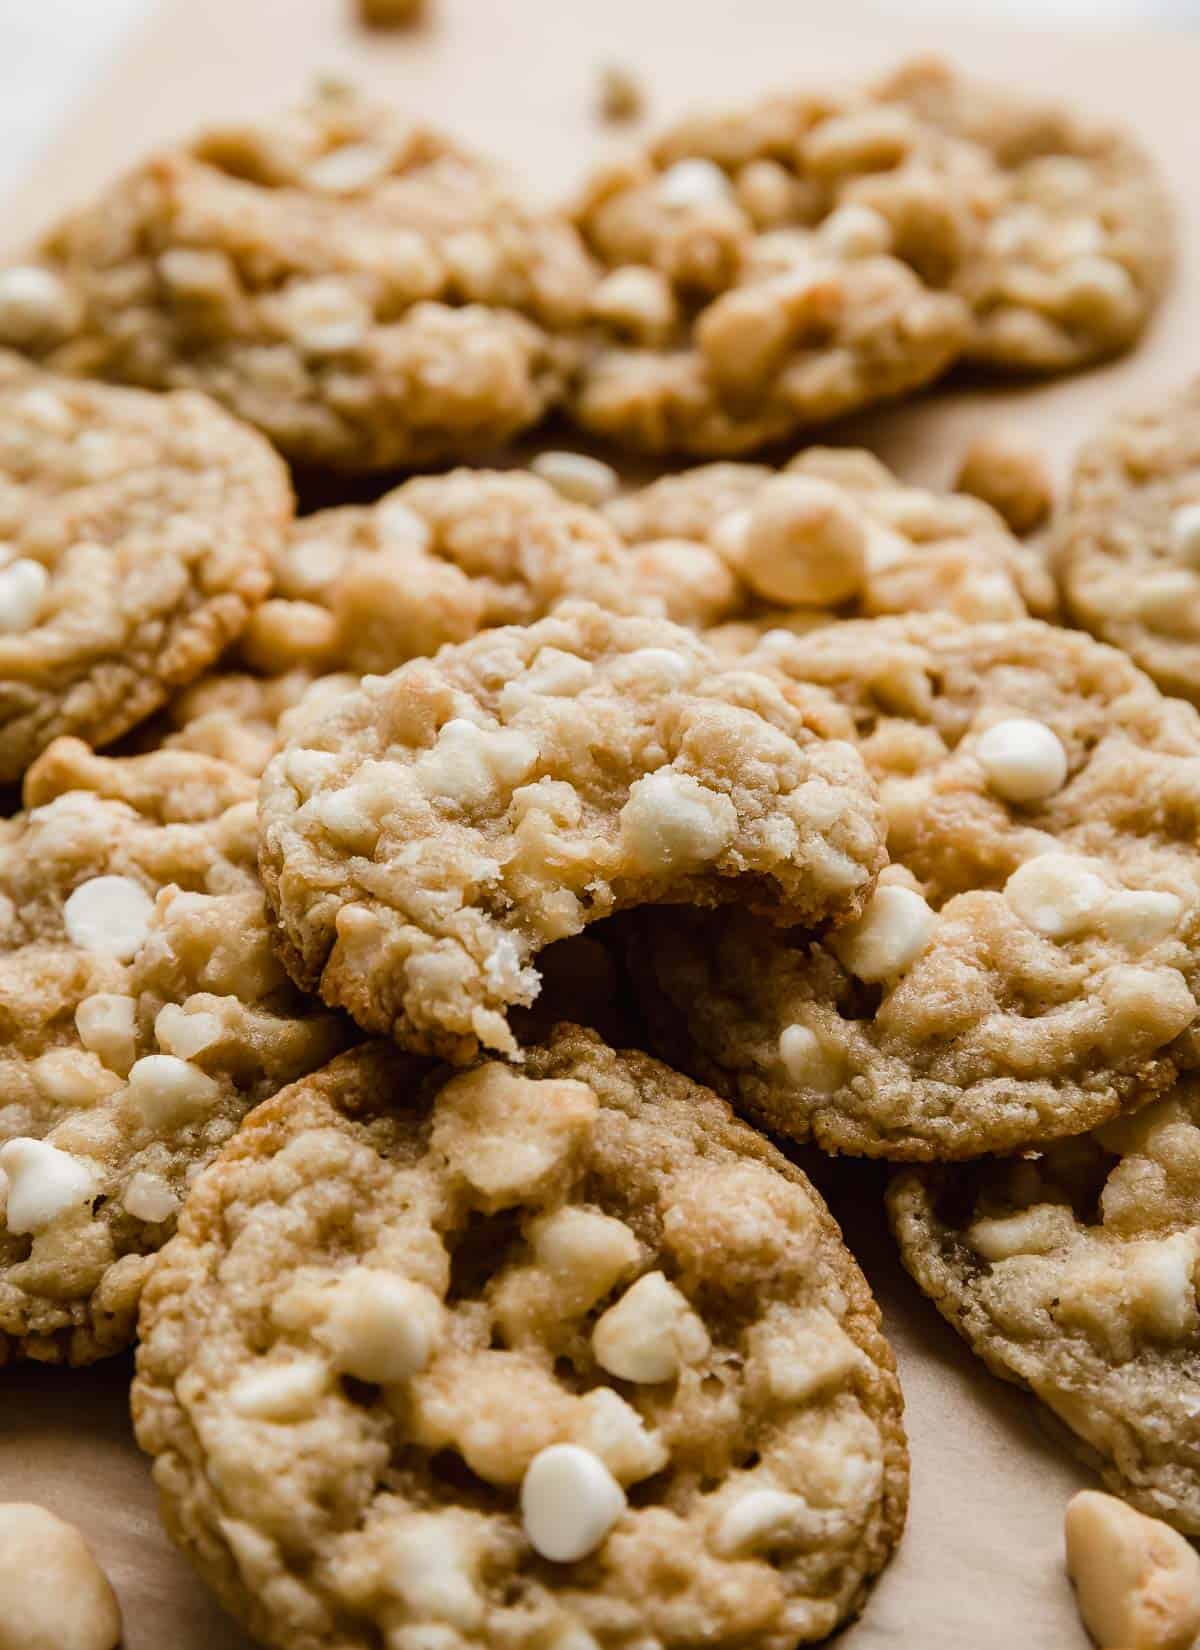 A White Chocolate Macadamia Nut Cookie with a bite taken out of it, stacked on a small pile of other macadamia nut white chocolate chip cookies.